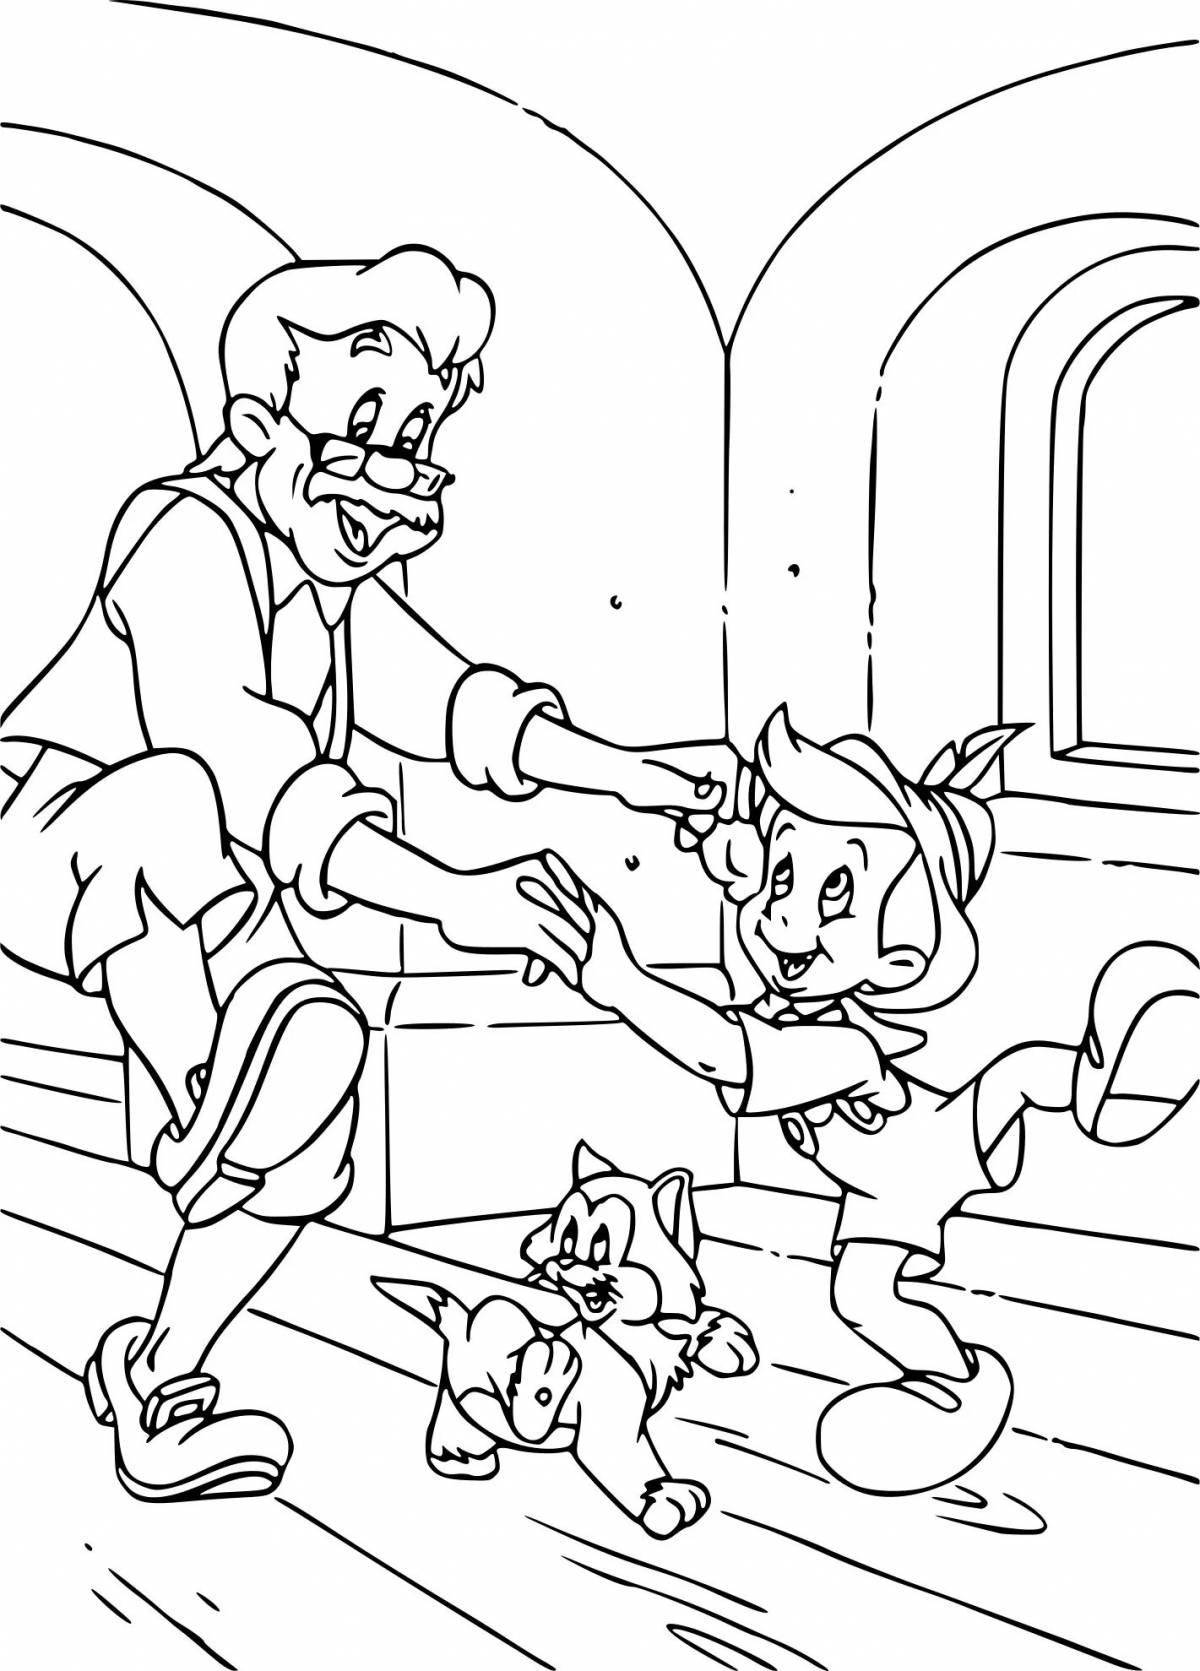 Pinocchio's charming coloring book